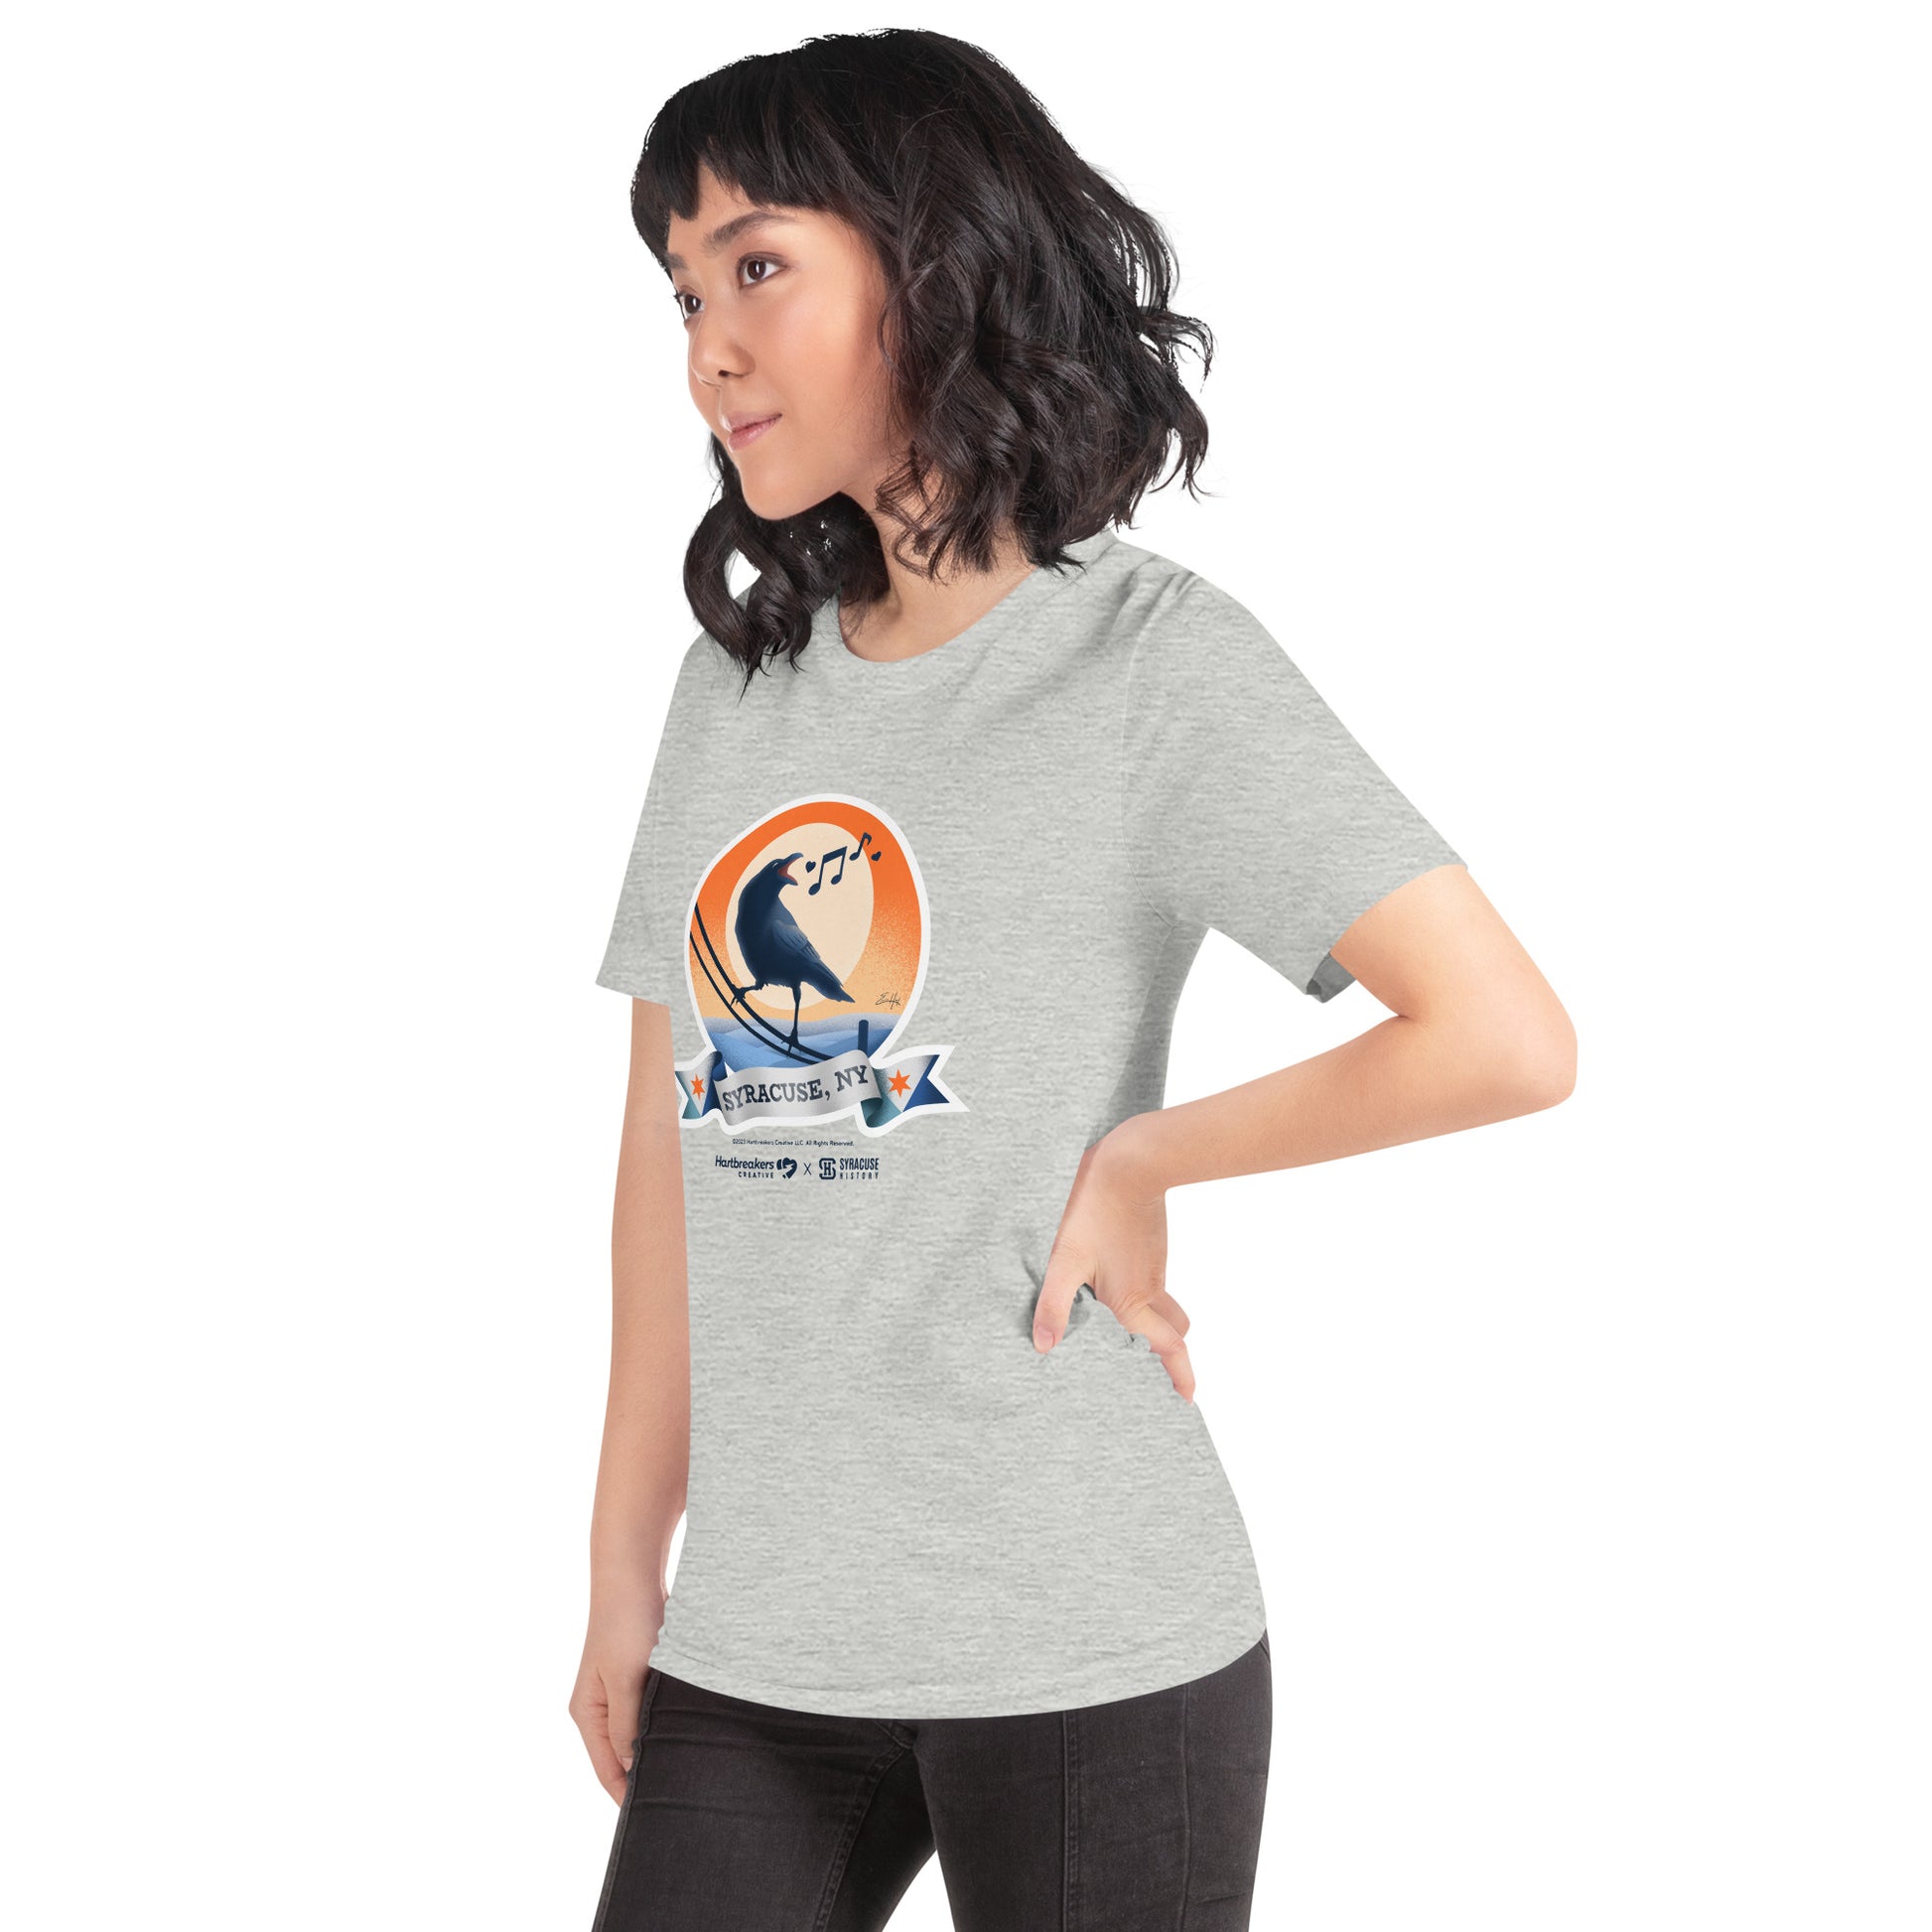 A woman wearing an athletic heather T-shirt featuring an illustration of a crow on a telephone wire and a banner beneath it that says Syracuse, NY